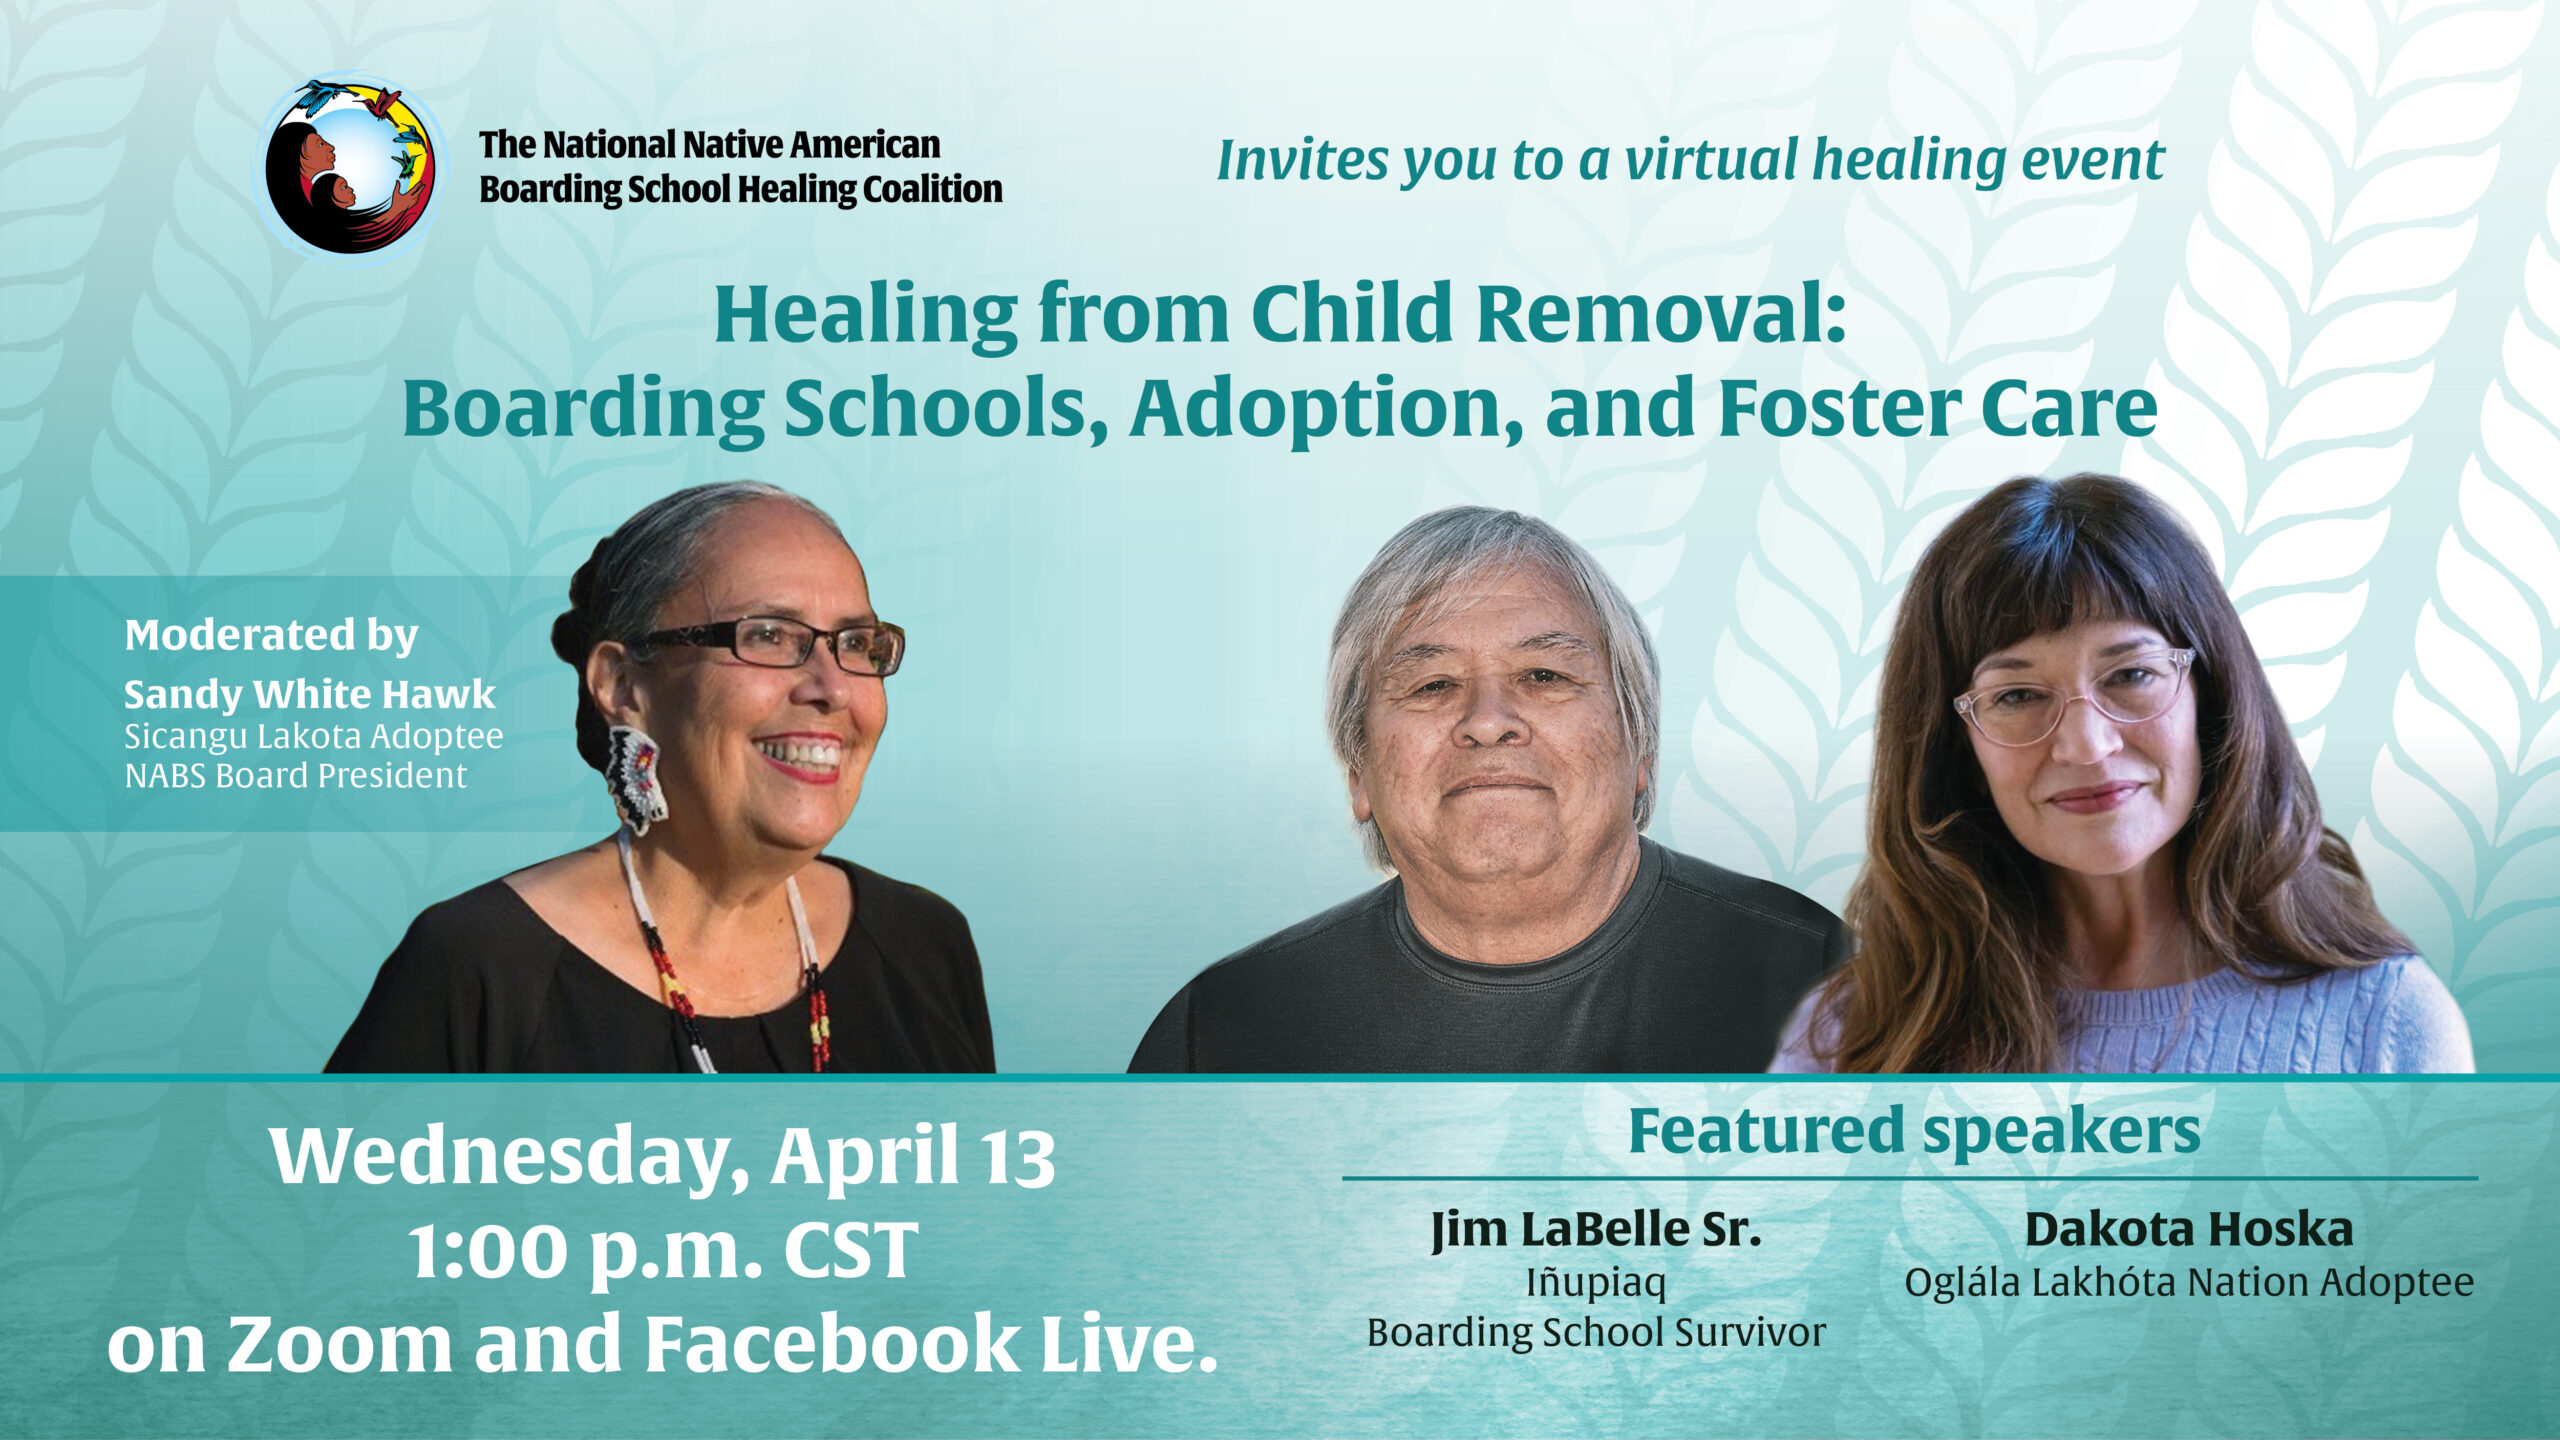 22-NABS-0021-FB or Twitter v1-April Virtual Healing Event Post-3A-GS2